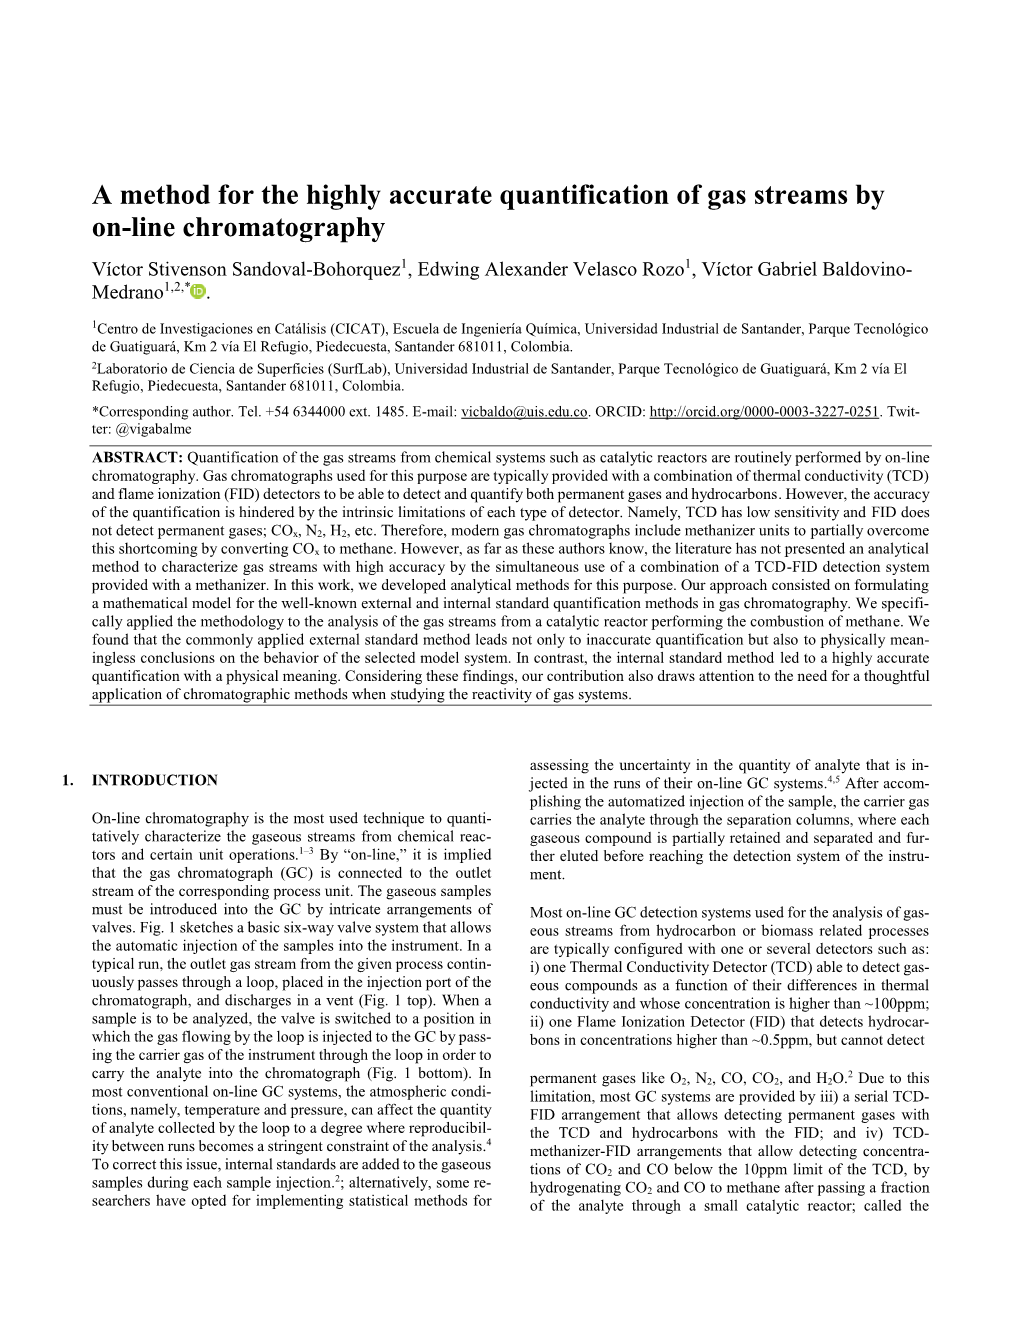 A Method for the Highly Accurate Quantification of Gas Streams by On